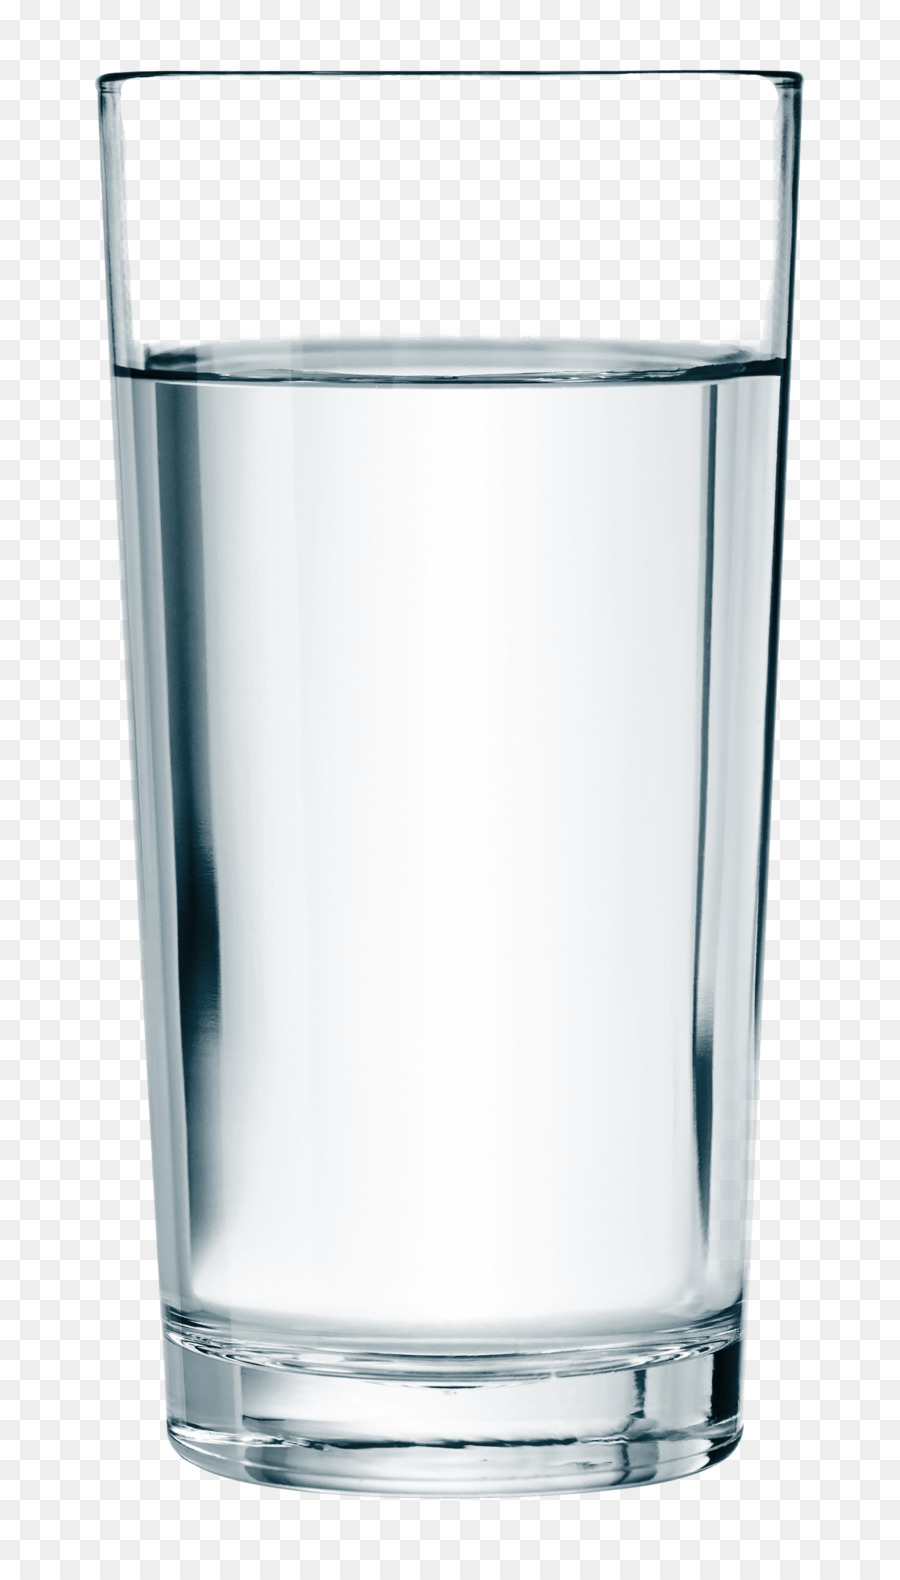 Cup Glass Drinking water - champagne glass png download - 1777*3094 - Free Transparent Cup png Download.